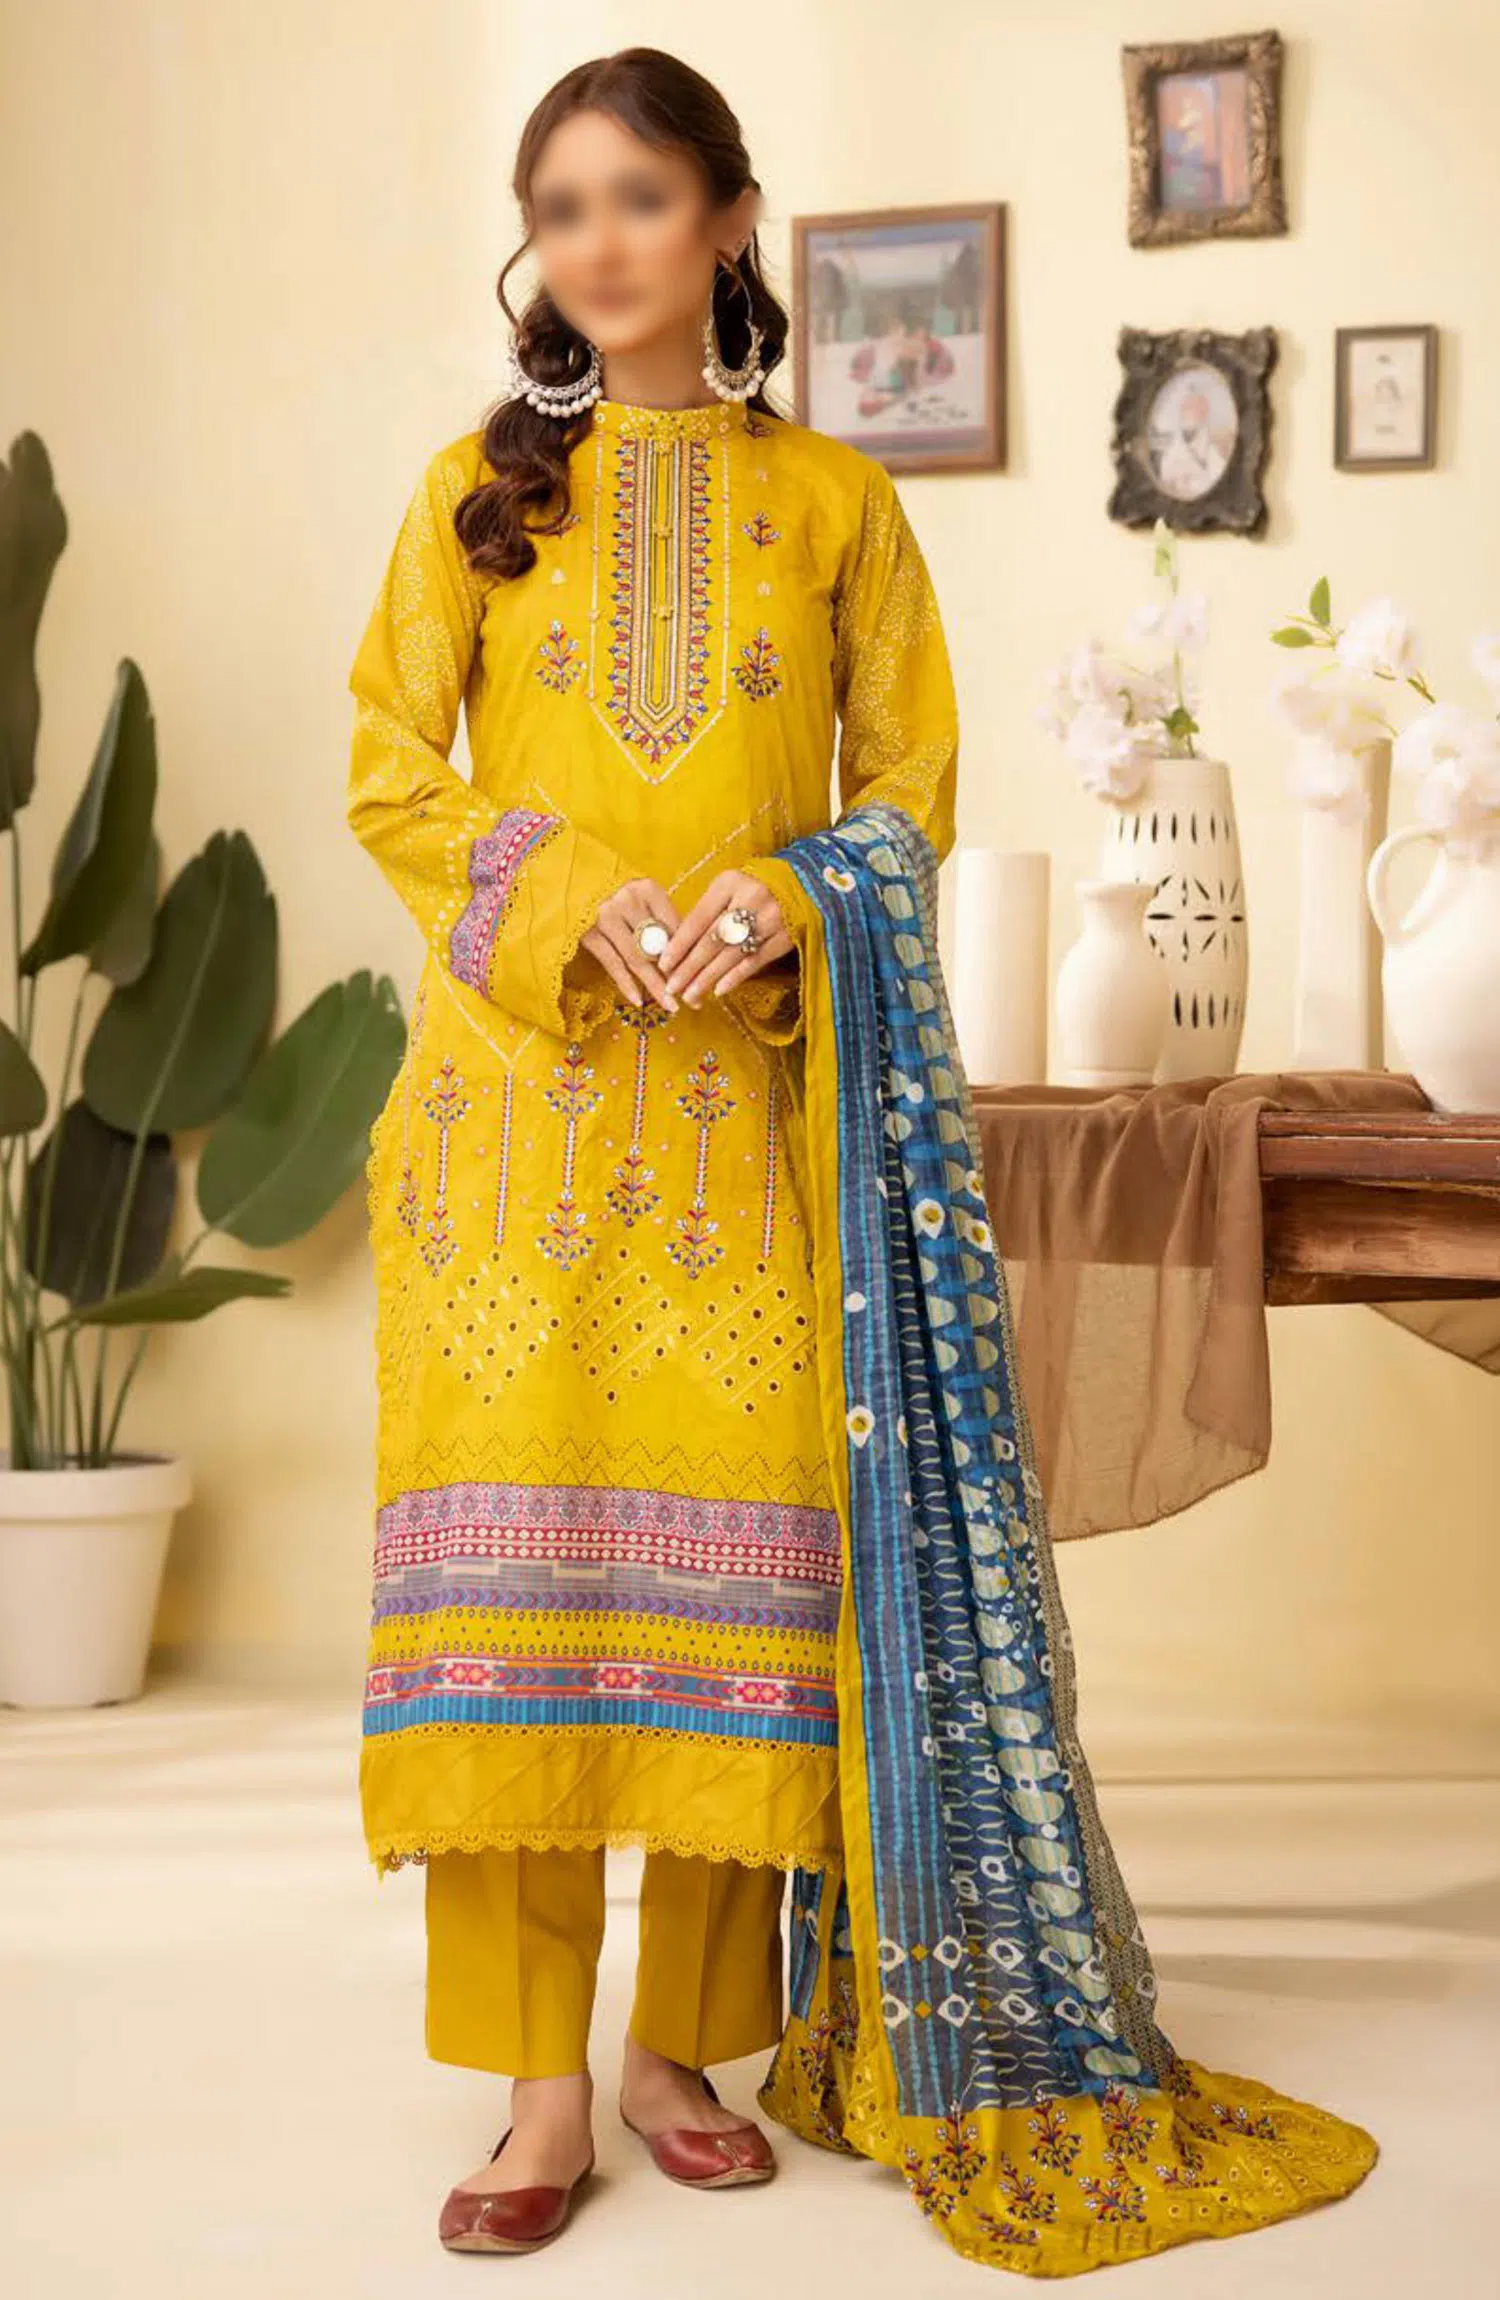 Mahees Ghazal Embroidered Lawn with Emb Voile Dupatta Collection - Design 03